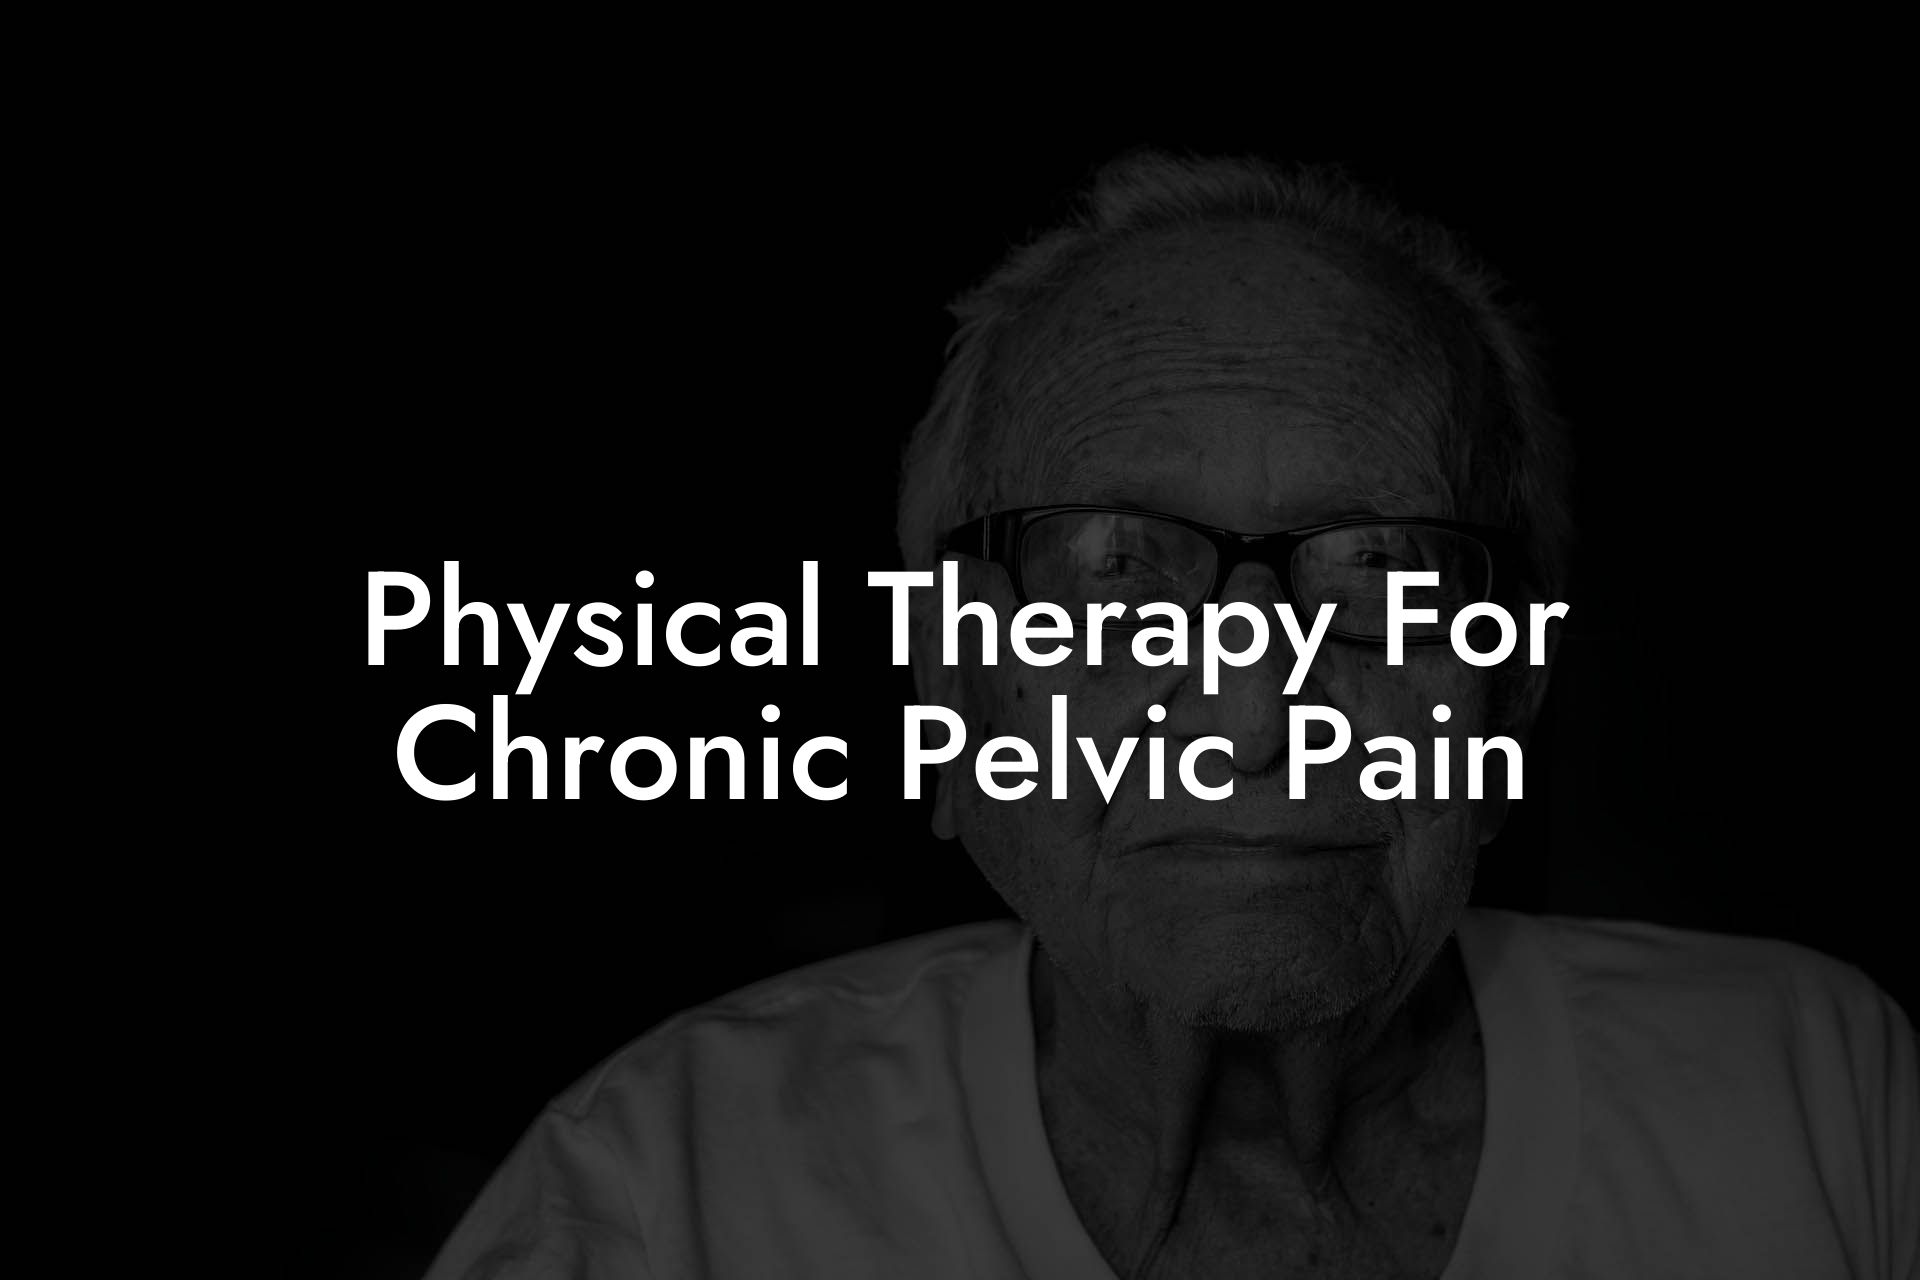 Physical Therapy For Chronic Pelvic Pain